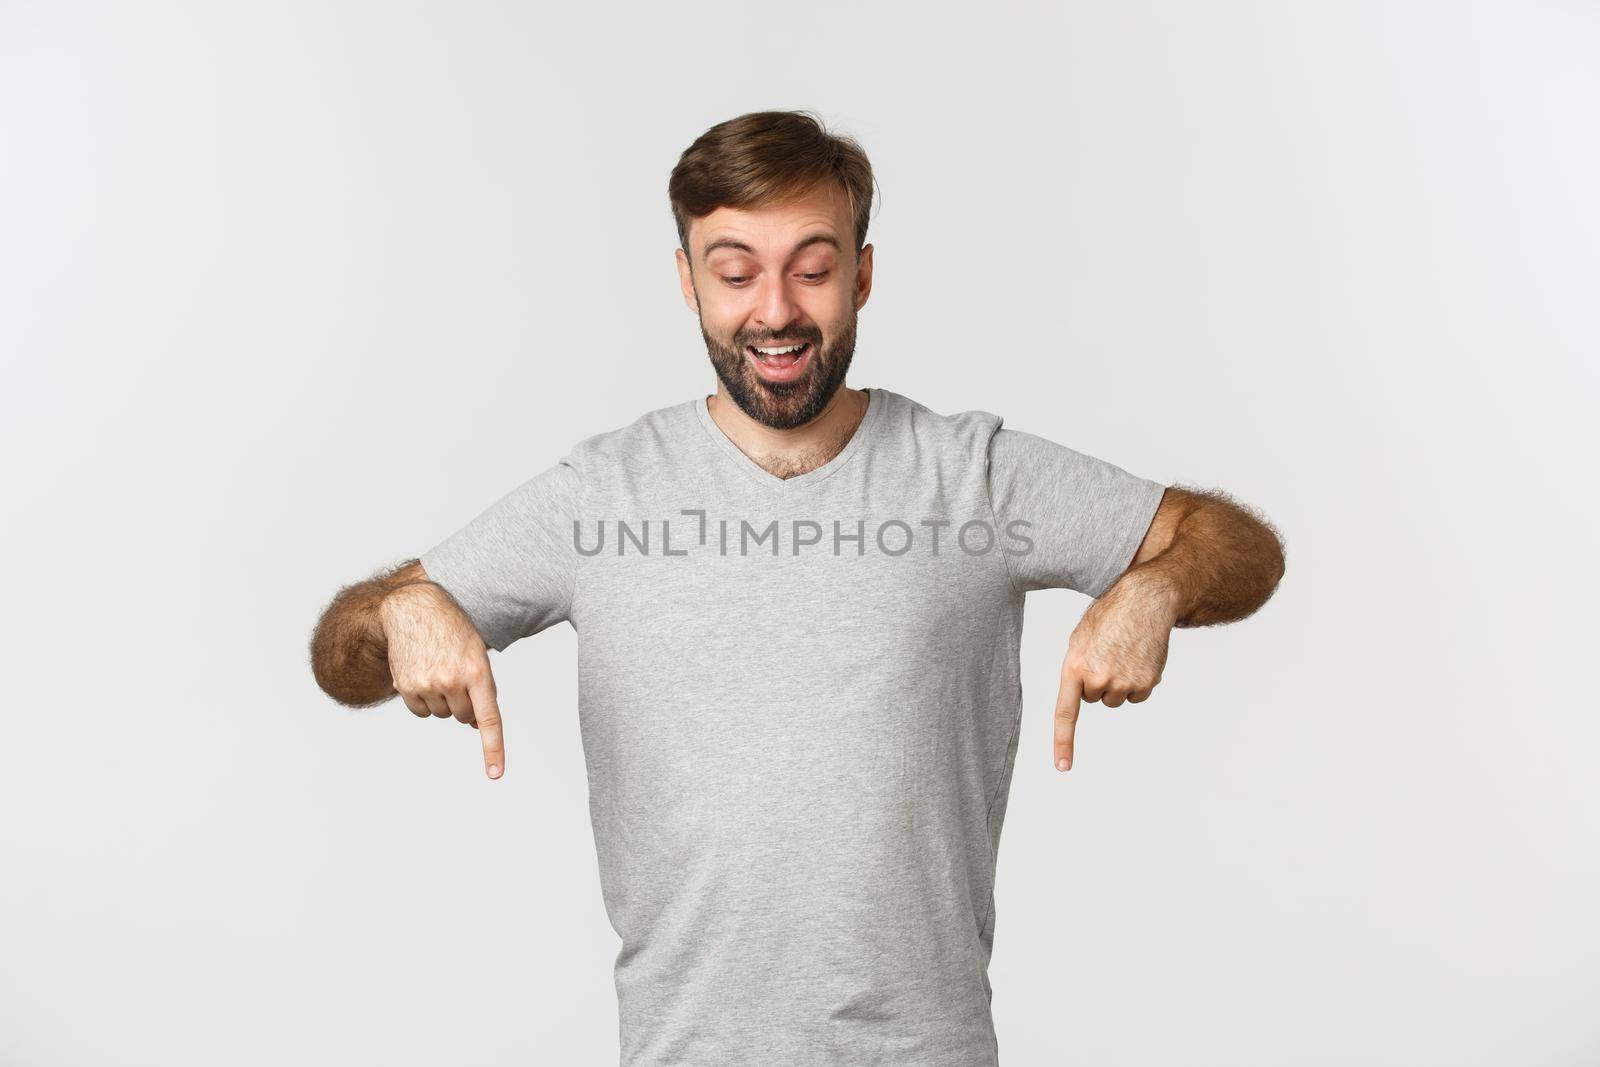 Portrait of excited adult male model in gray t-shirt, looking and pointing down, showing product advertisement, standing over white background.